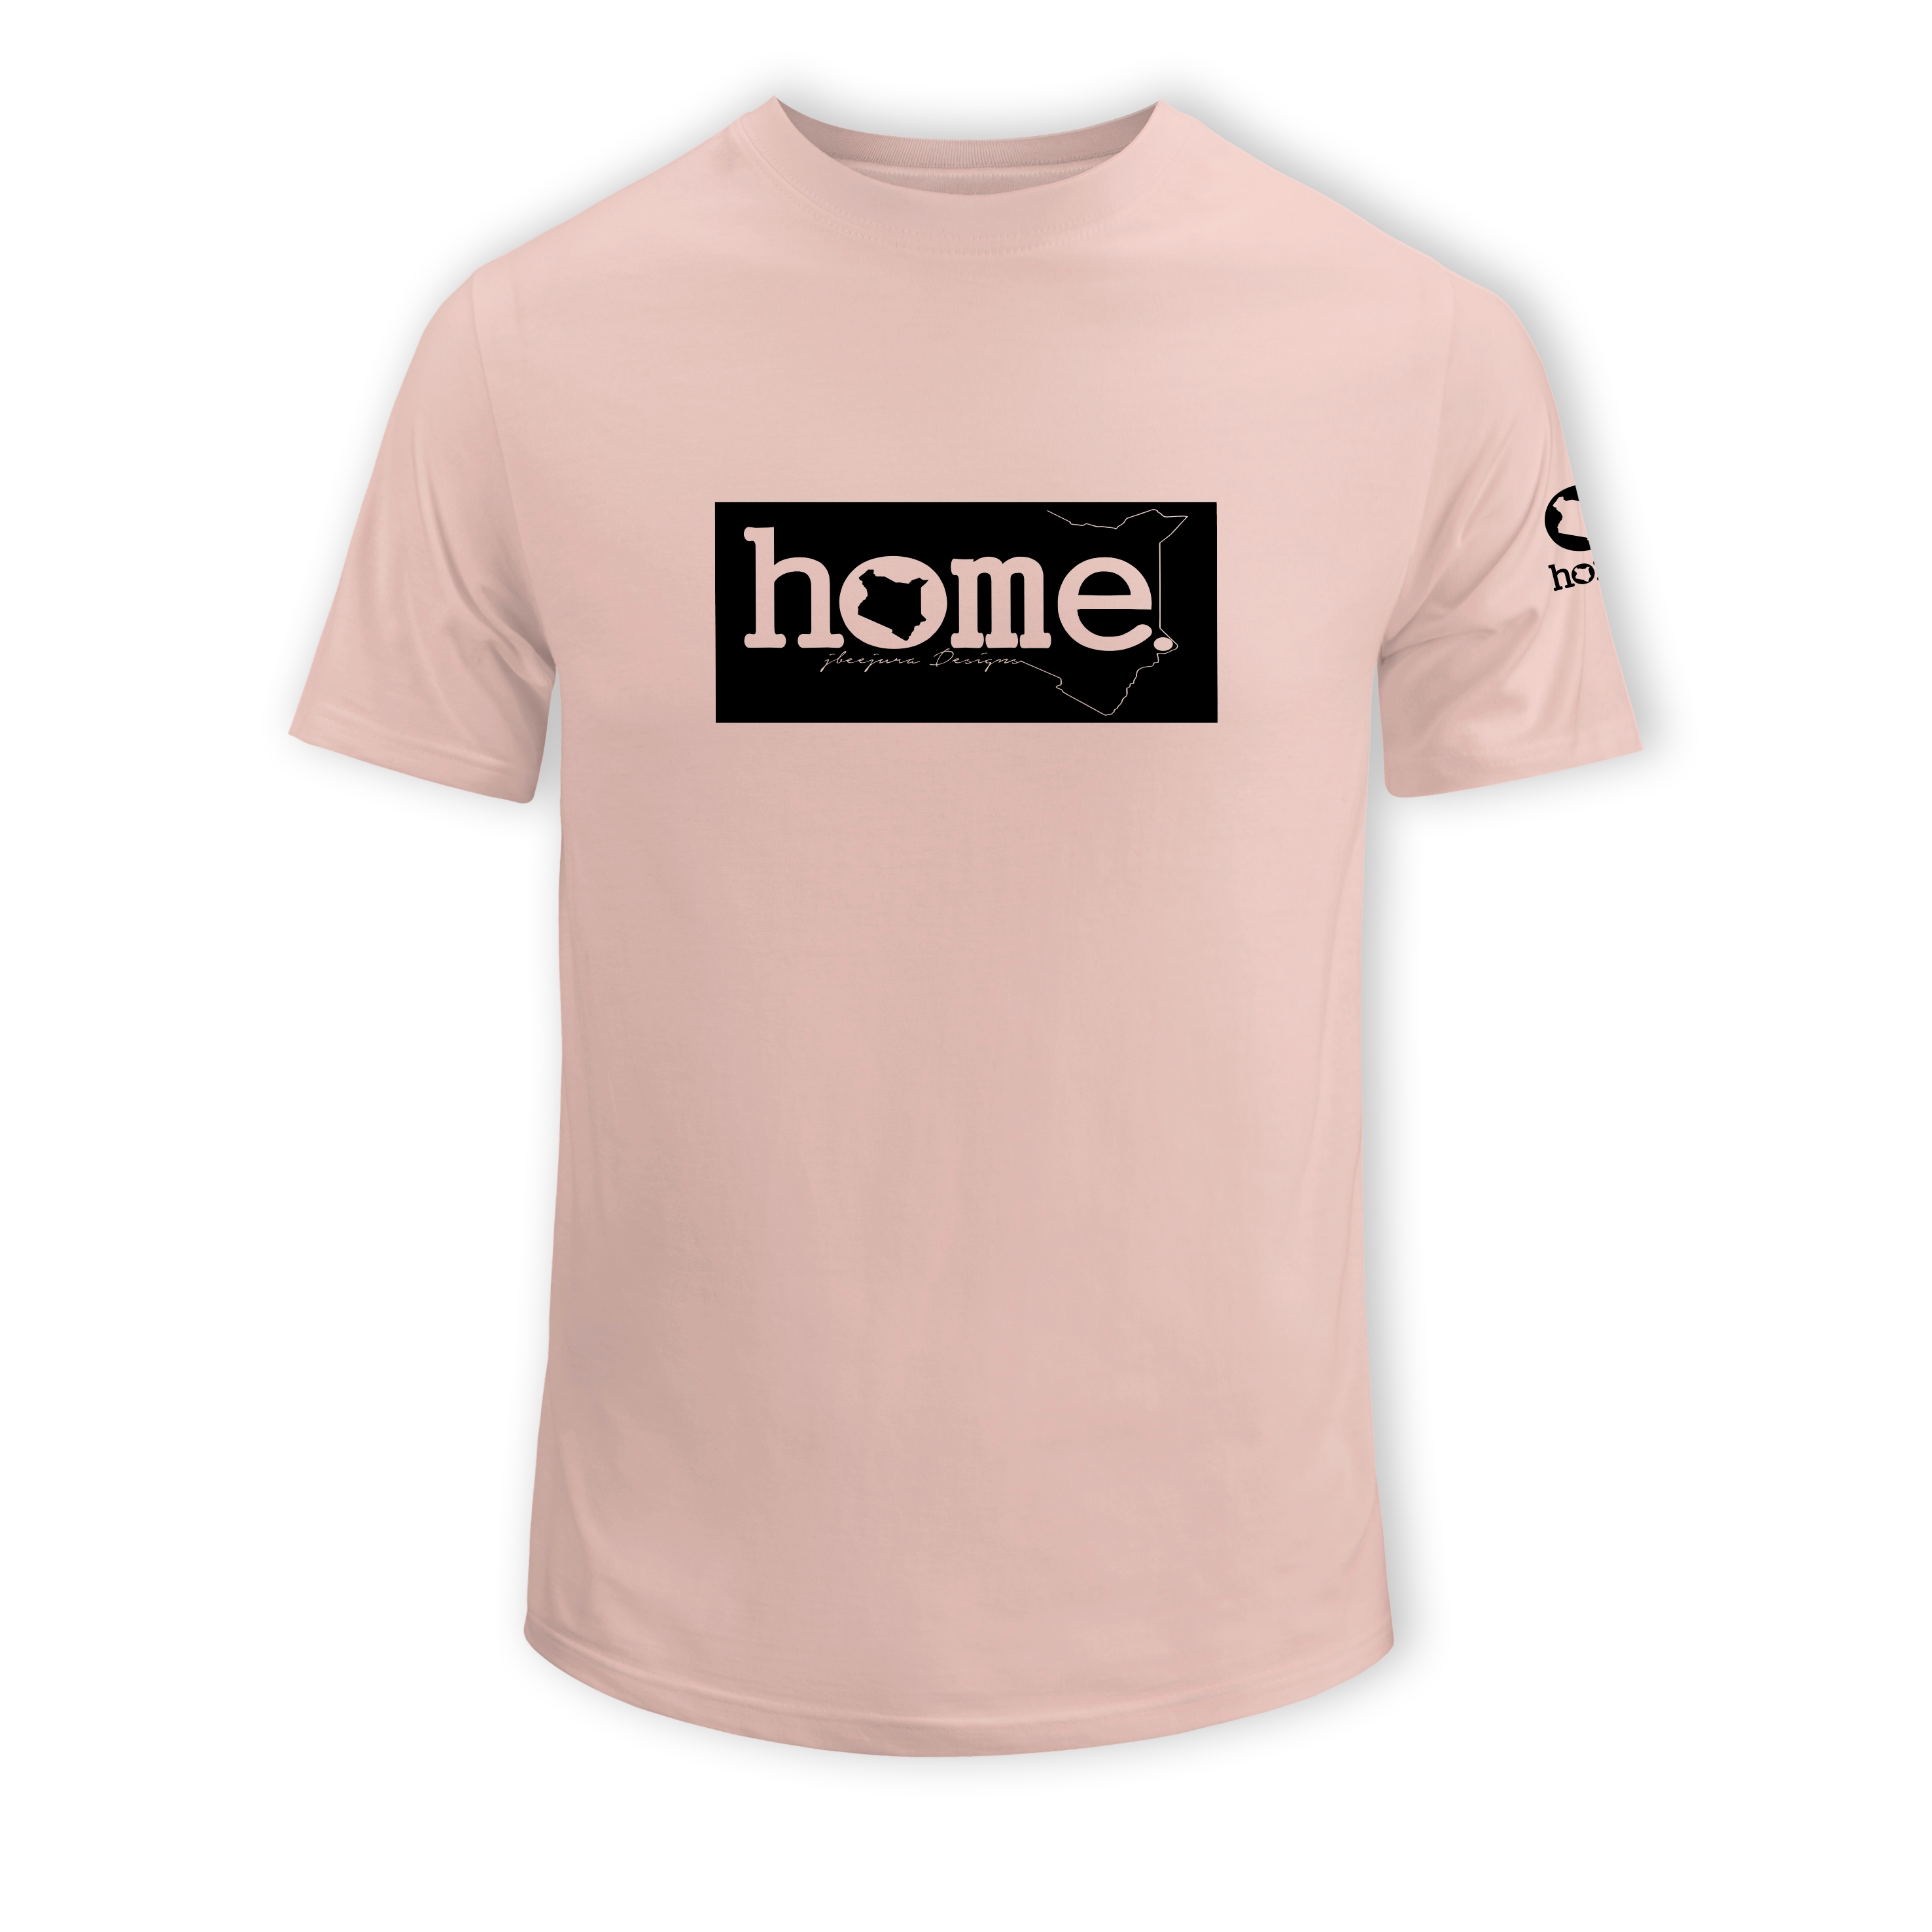 home_254 SHORT-SLEEVED PEACH T-SHIRT WITH A BLACK CLASSIC PRINT – COTTON PLUS FABRIC